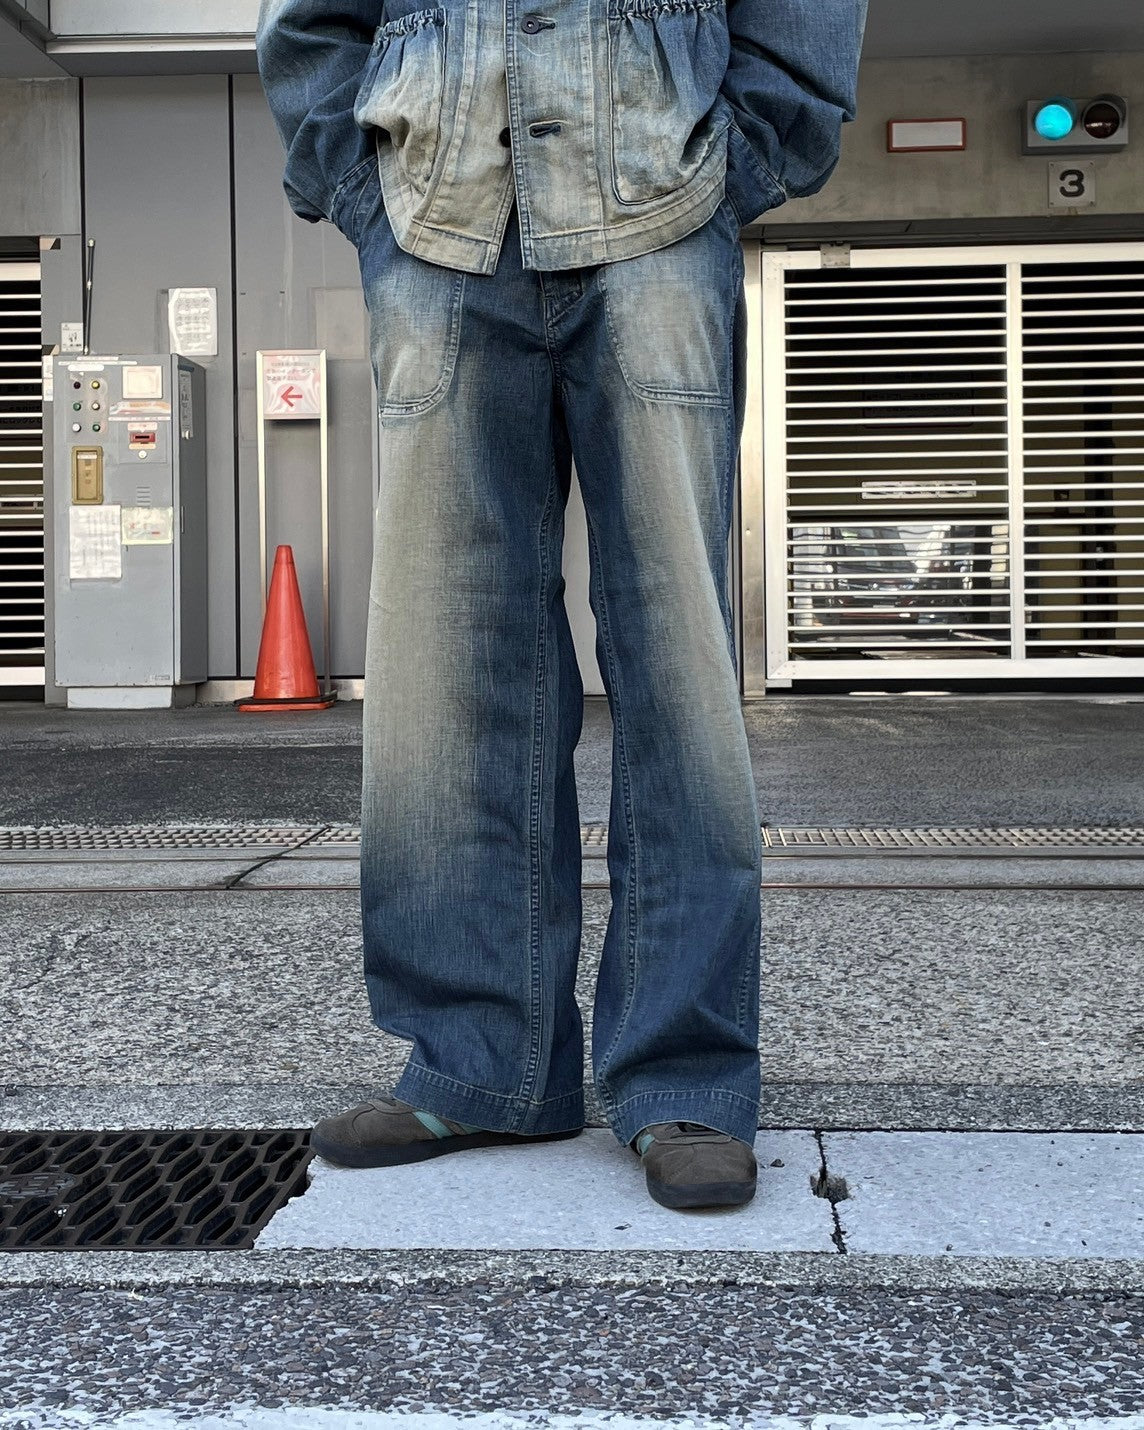 refomed / OLD MAN DENIM TROUSERS "USED"